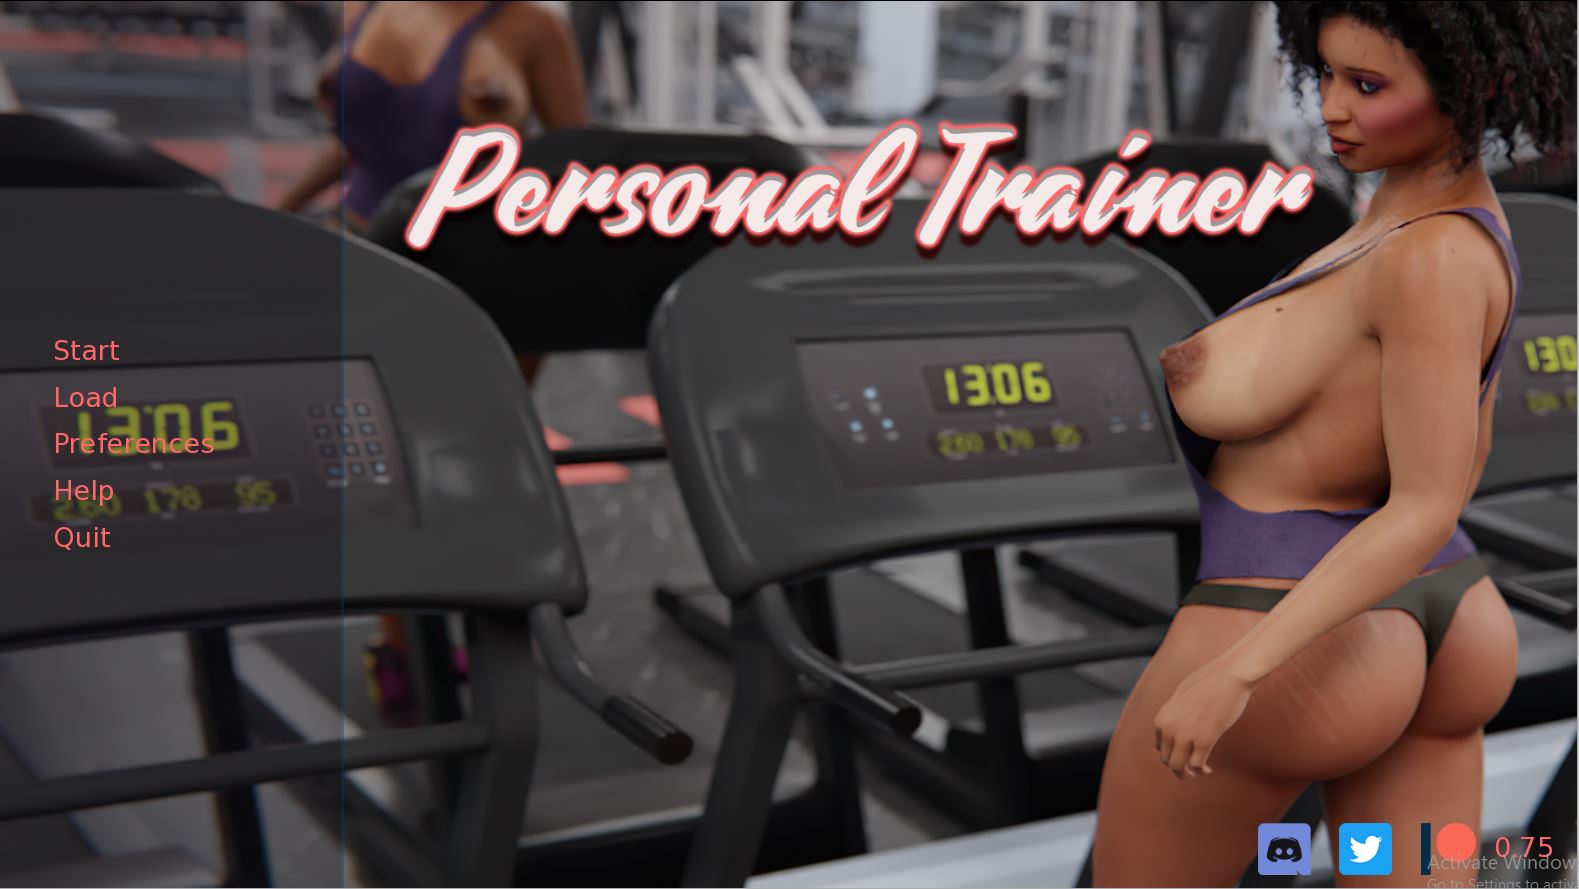 Personal Trainer - Personal Trainer â€“ New Final Version 1.0 (Full Game) - Adult Games Collector